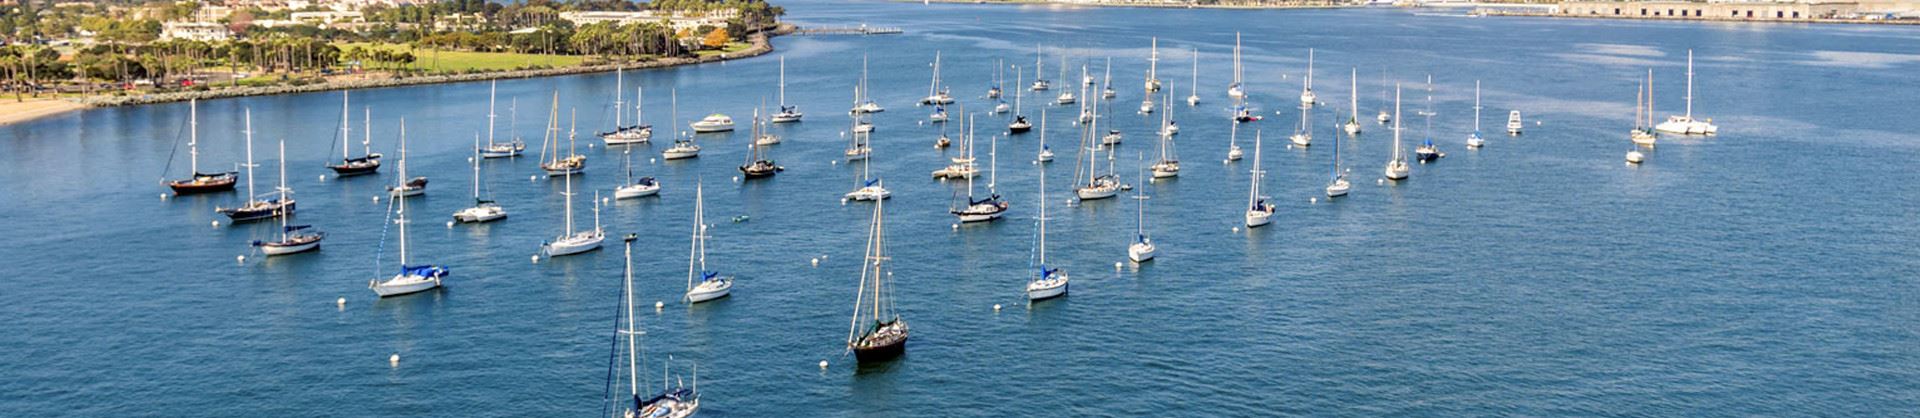 San Diego Harbor with Boats